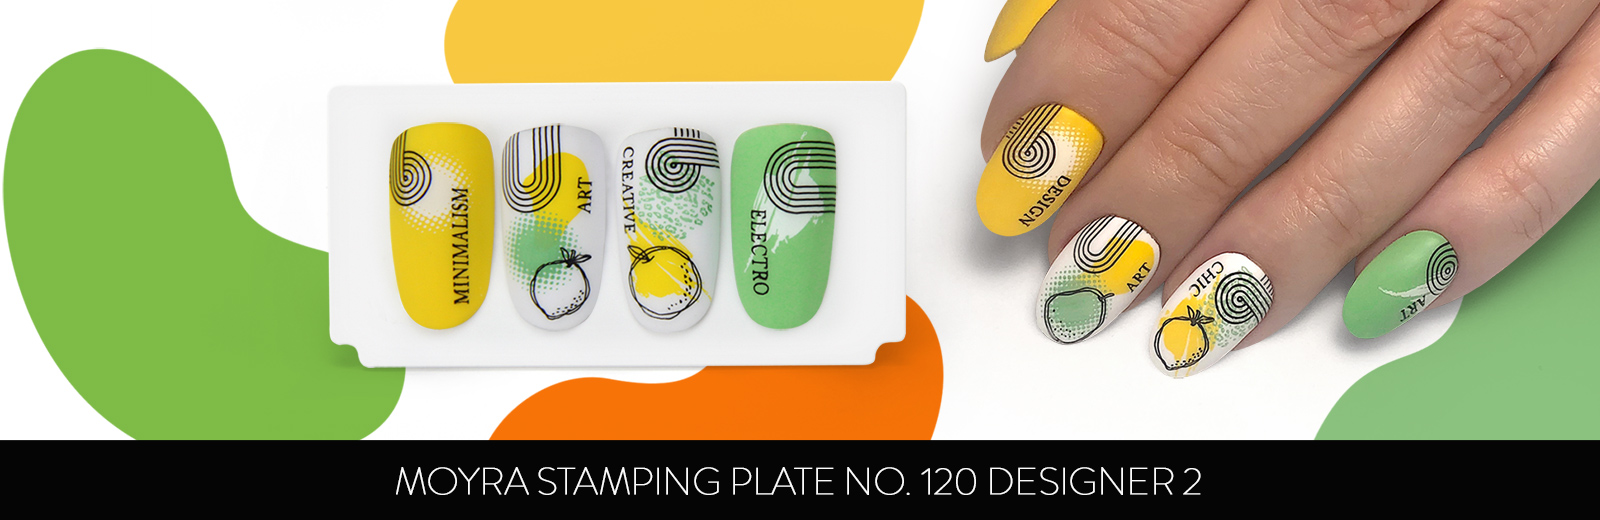 New stamping plate has arrived! NO. 120 DESIGNER 2